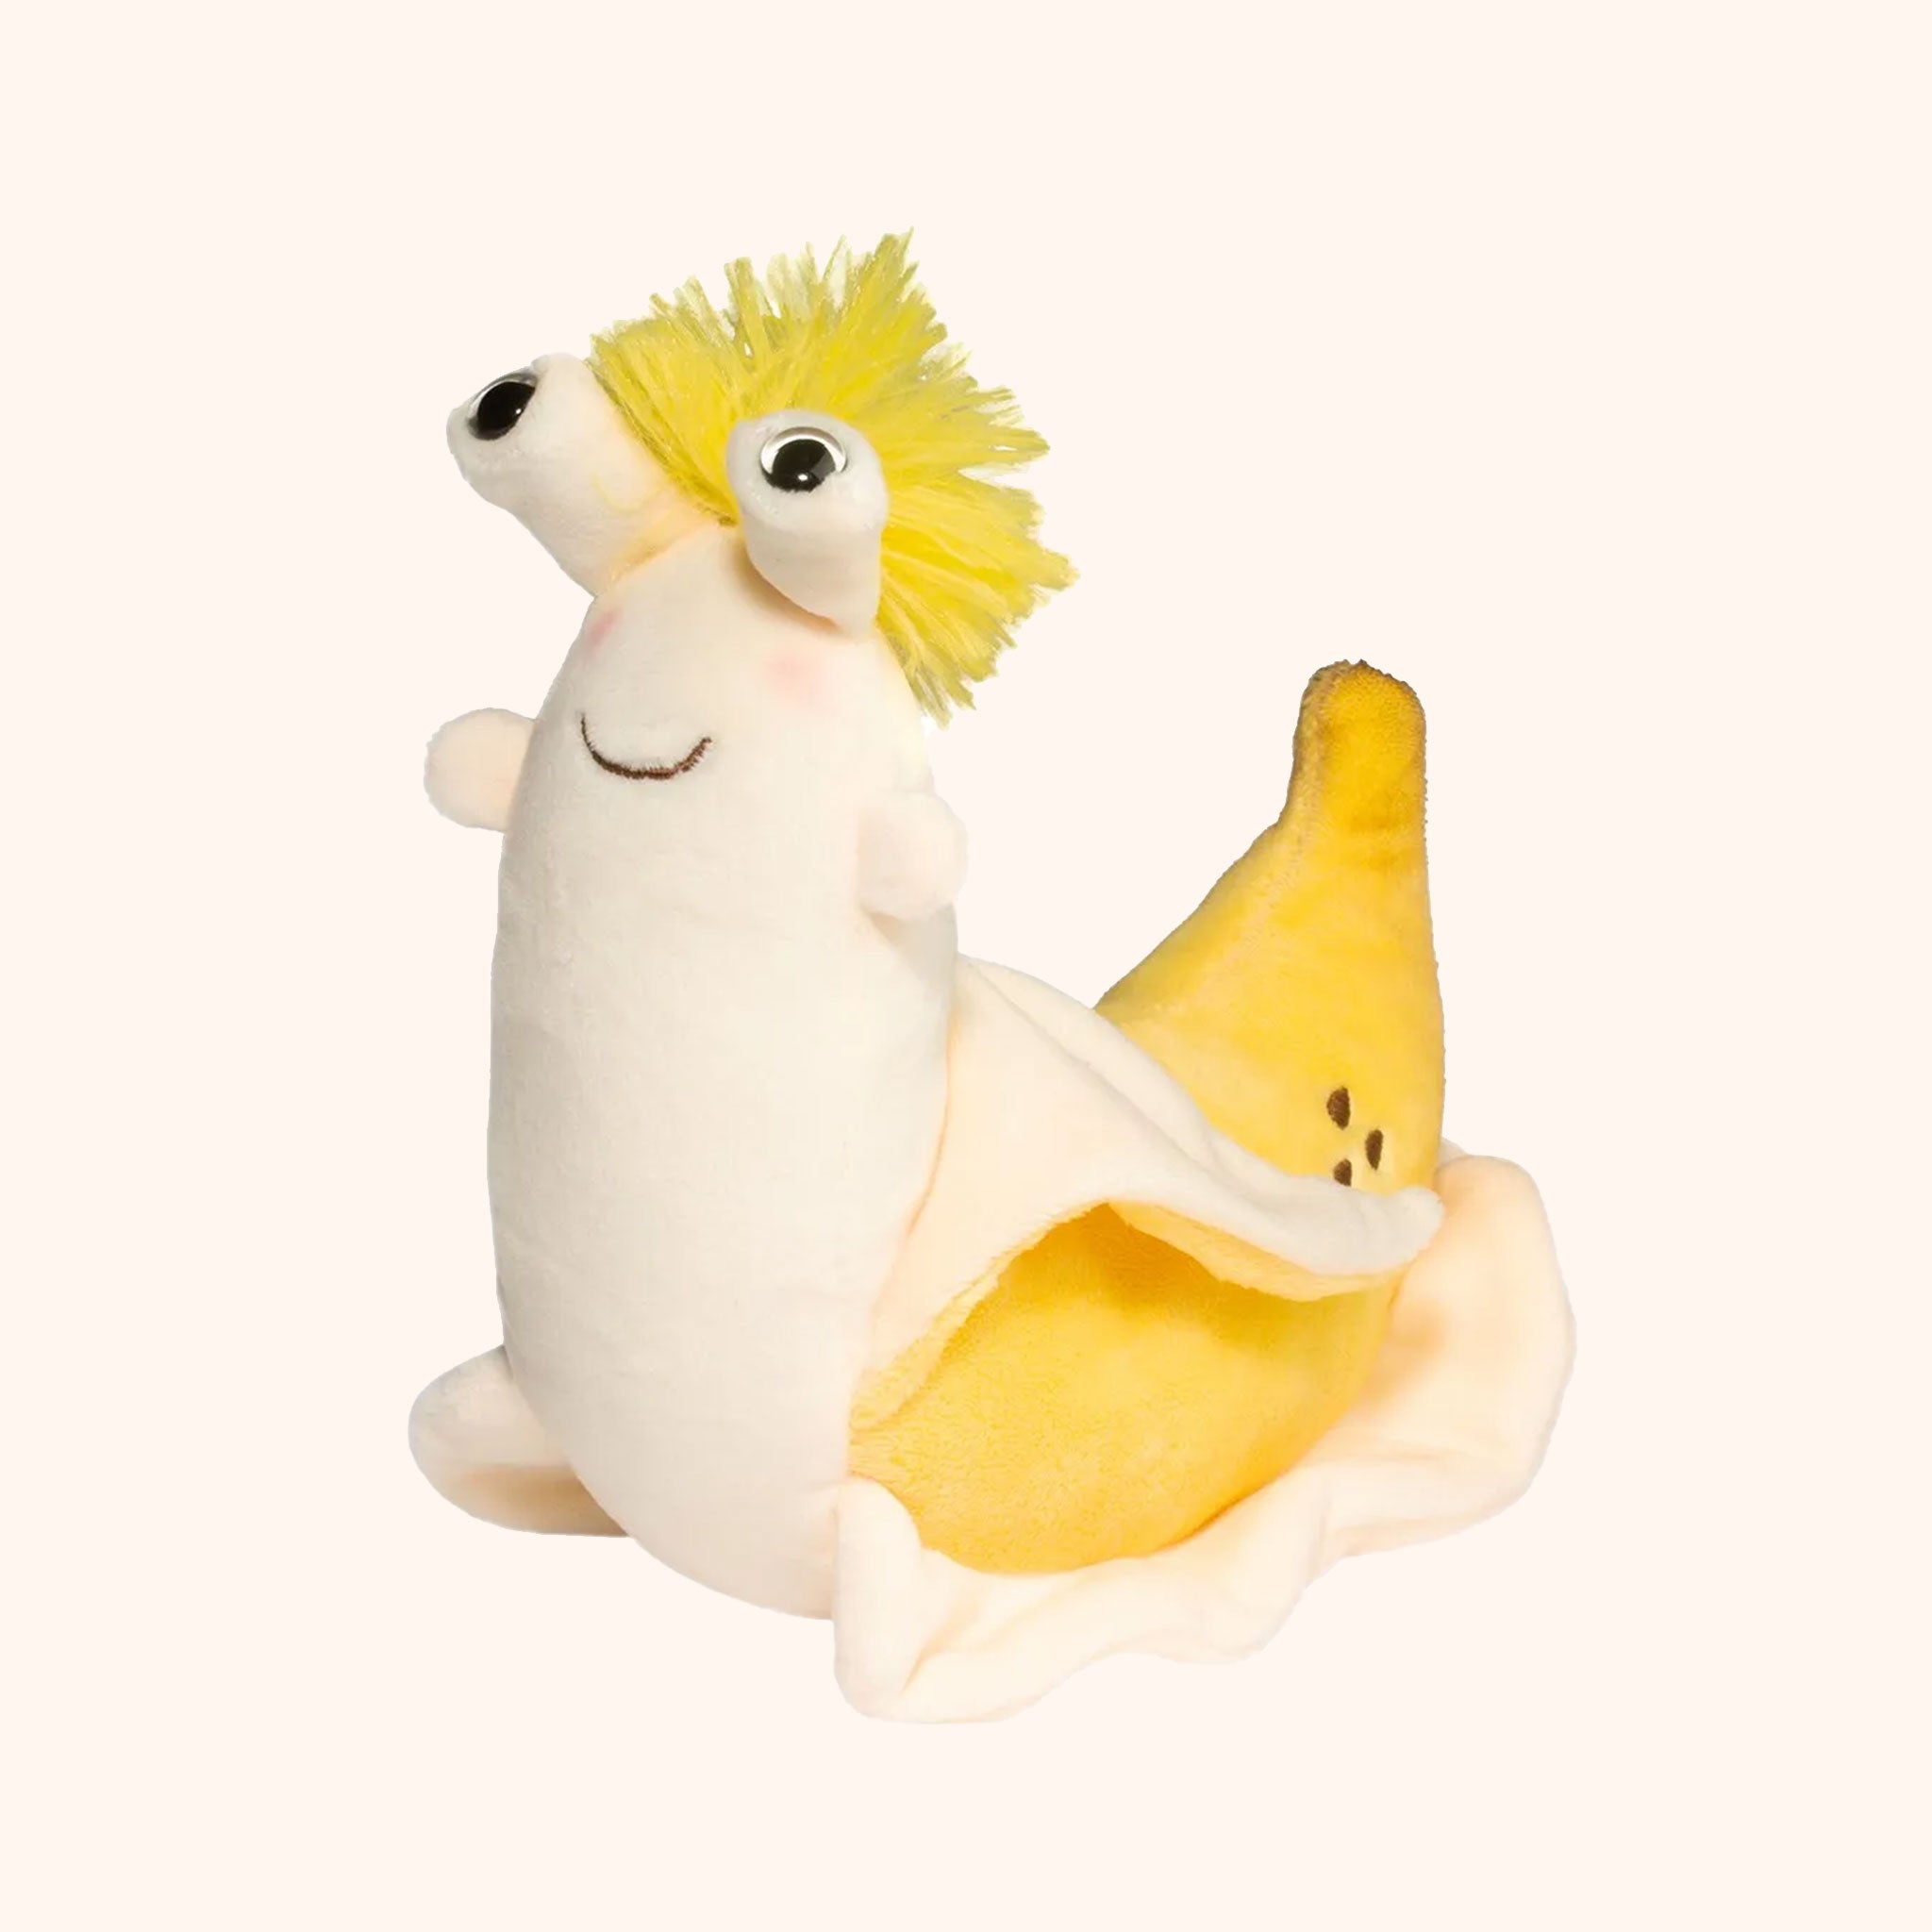 On a tan background is an ivory and bright yellow banana slug shaped stuffed animal toy with bulging eyes, a fluffy yellow pom on the top of its head. The back of its body is shaped like a banana peel. 